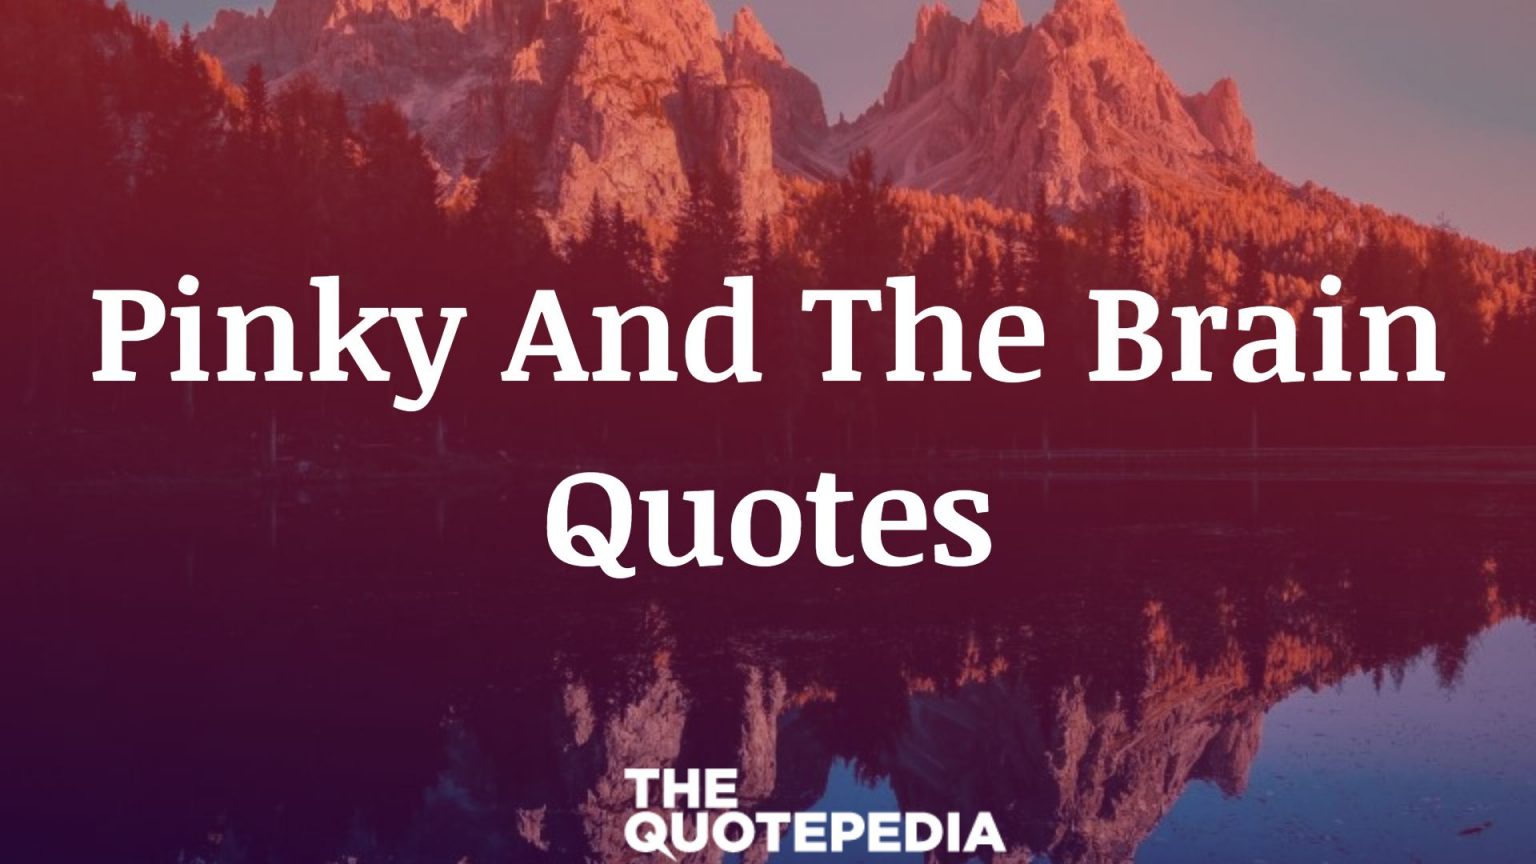 Here Are The Best Pinky And The Brain Quotes